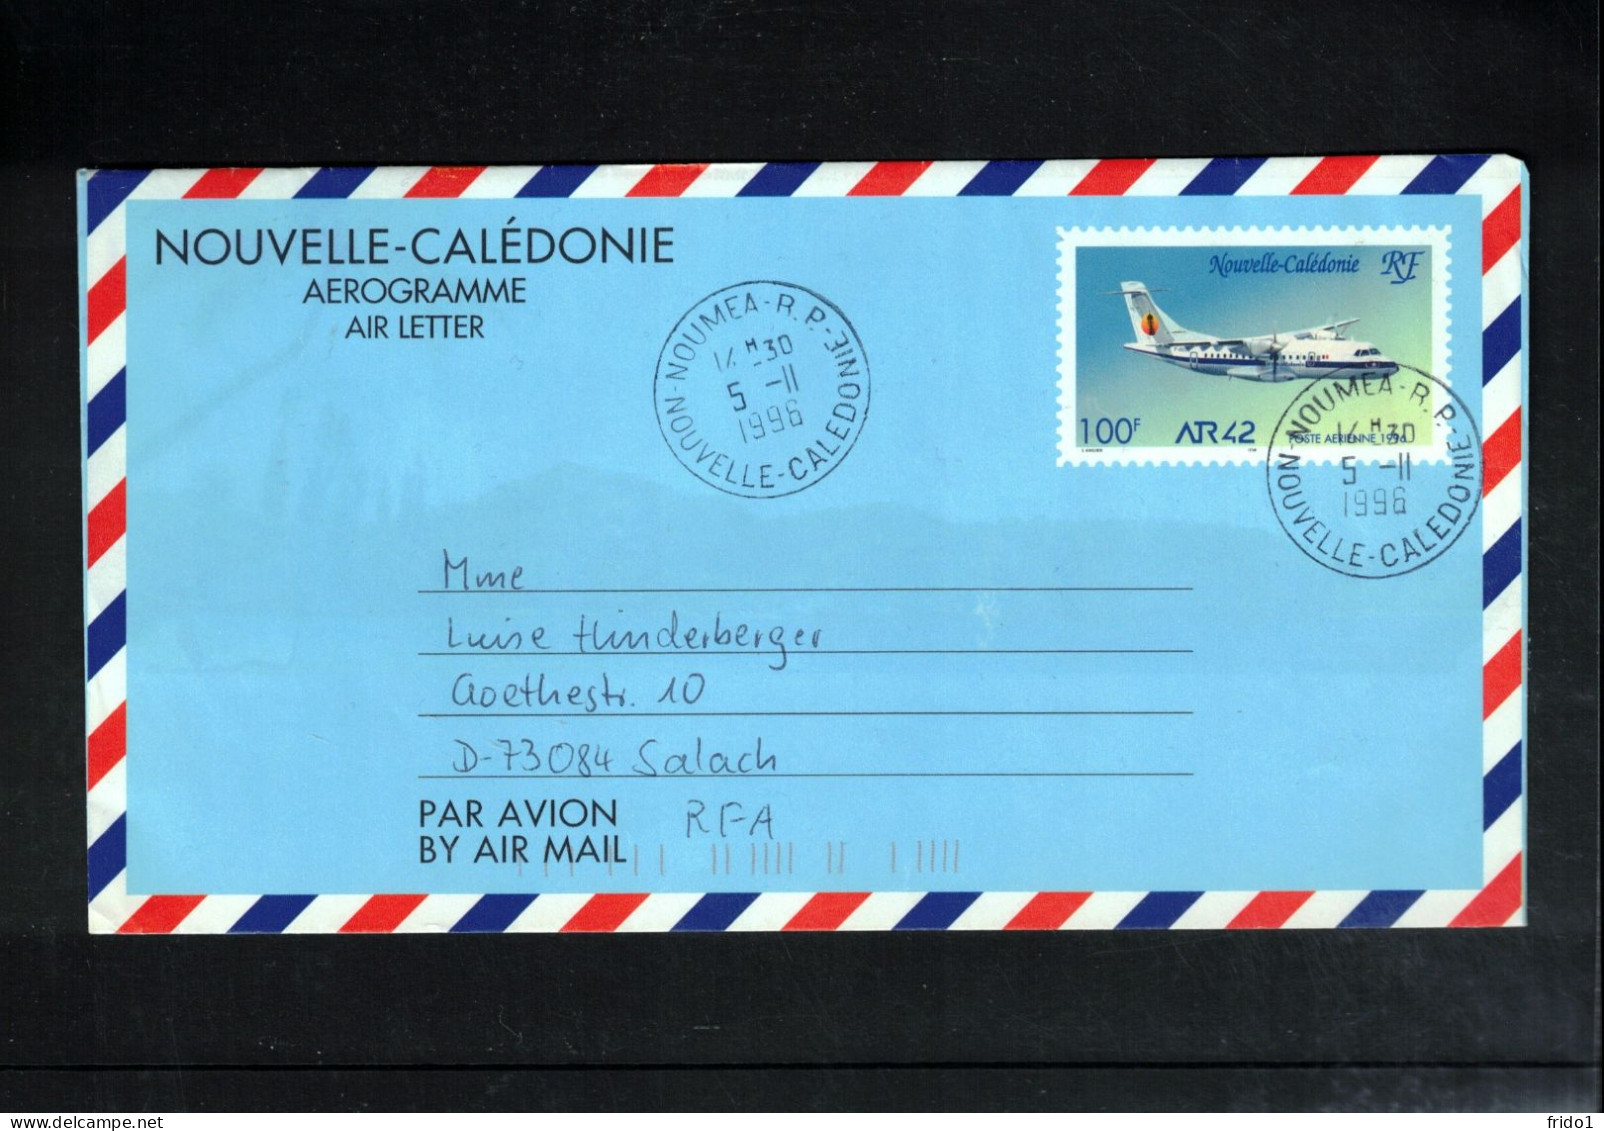 New Caledonia / Nouvelle Caledonie 1996 Interesting Aerogramme - Covers & Documents